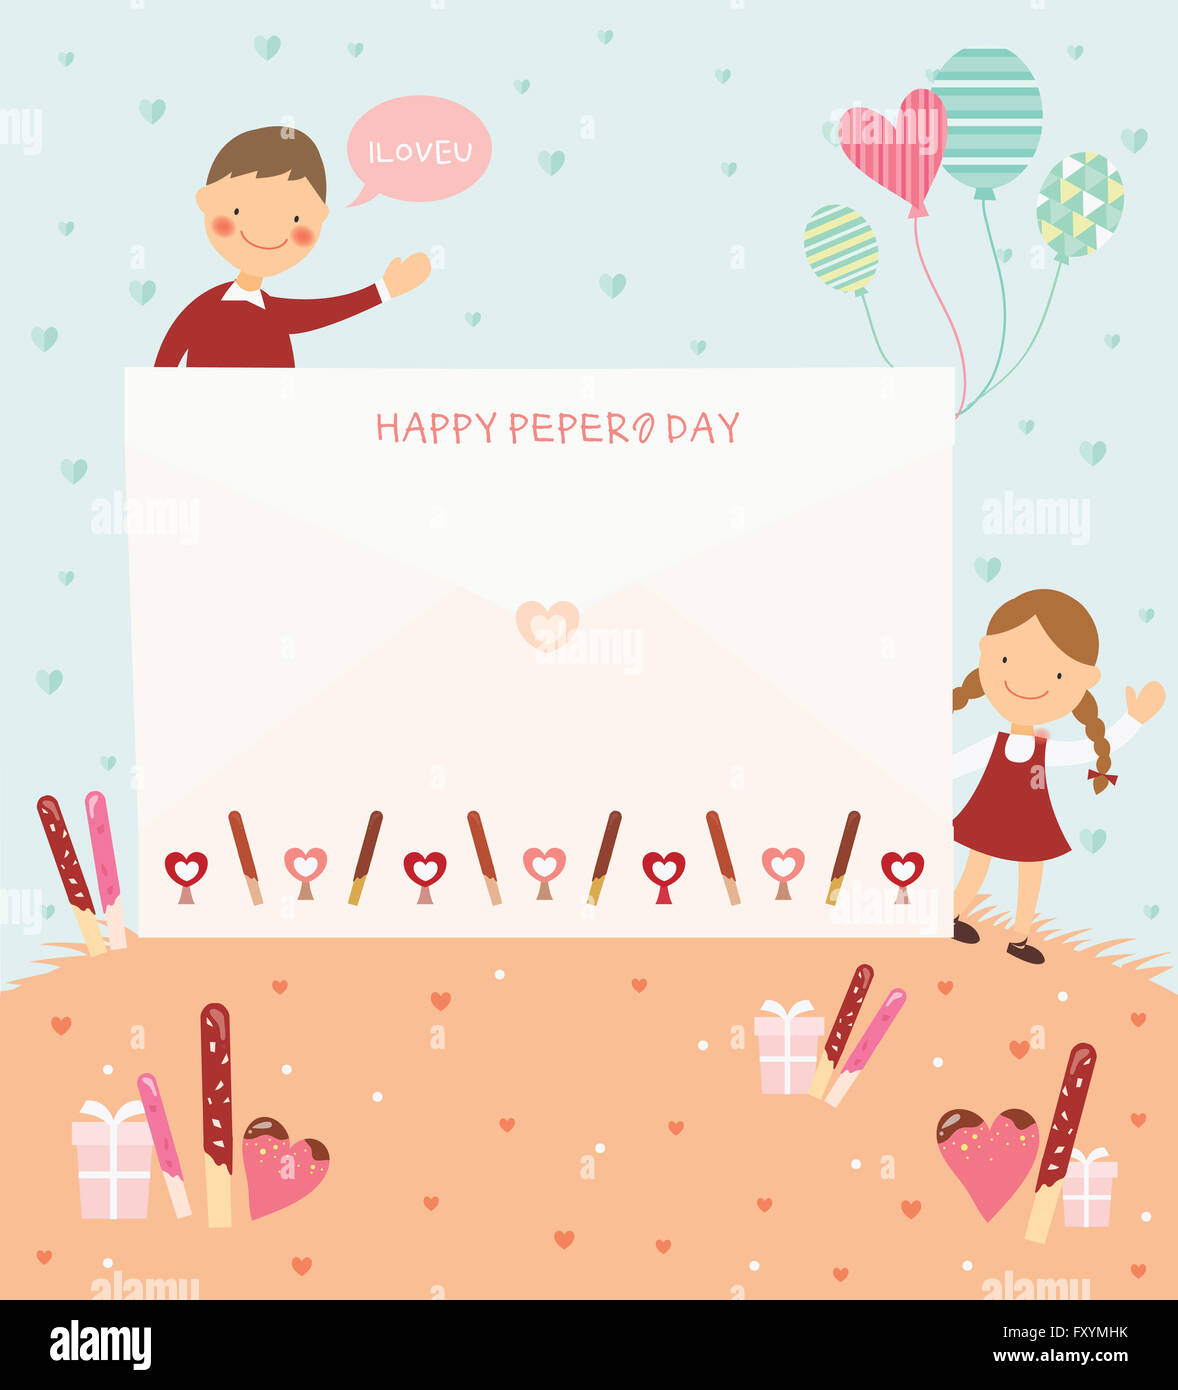 Card design with copy space in illustration for Pepero Day Stock Photo